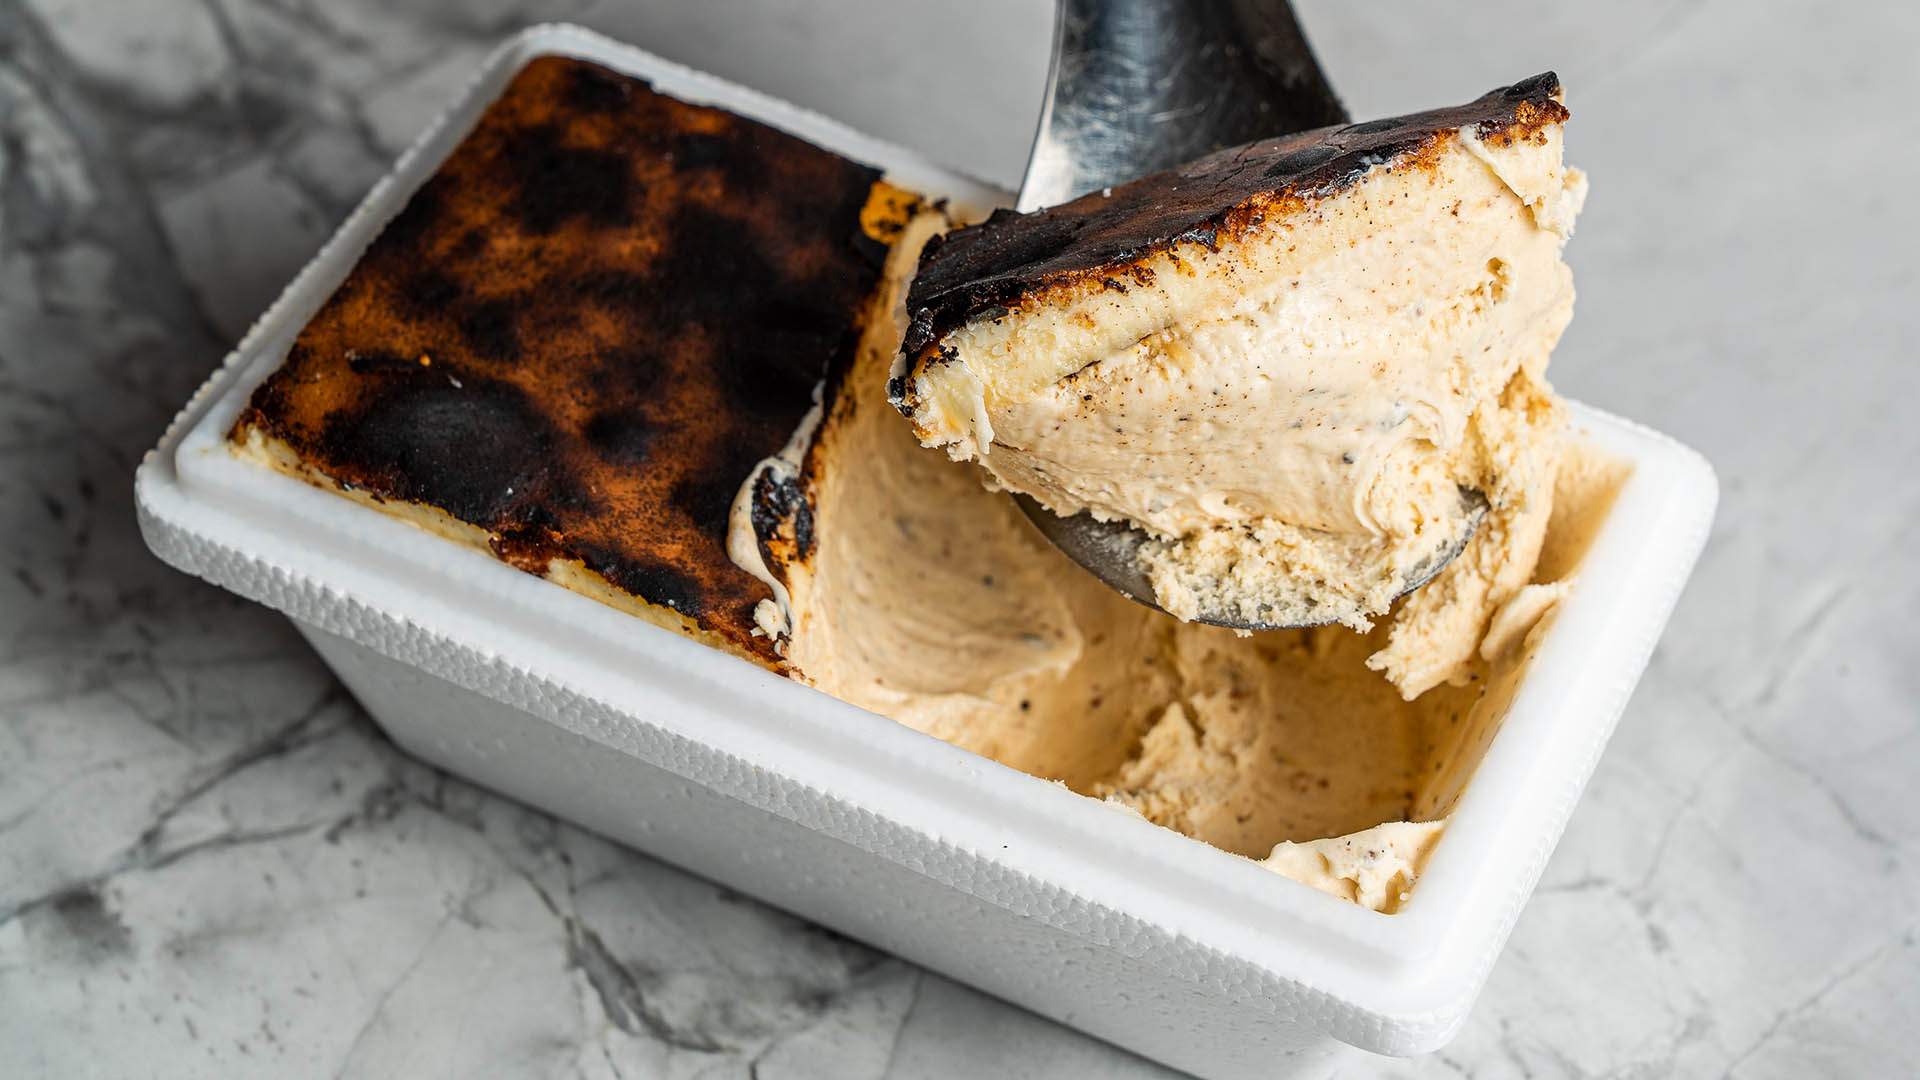 Basque Cheesecake Gelato Is the Latest Indulgent Messina Flavour You Can Order by the Tub